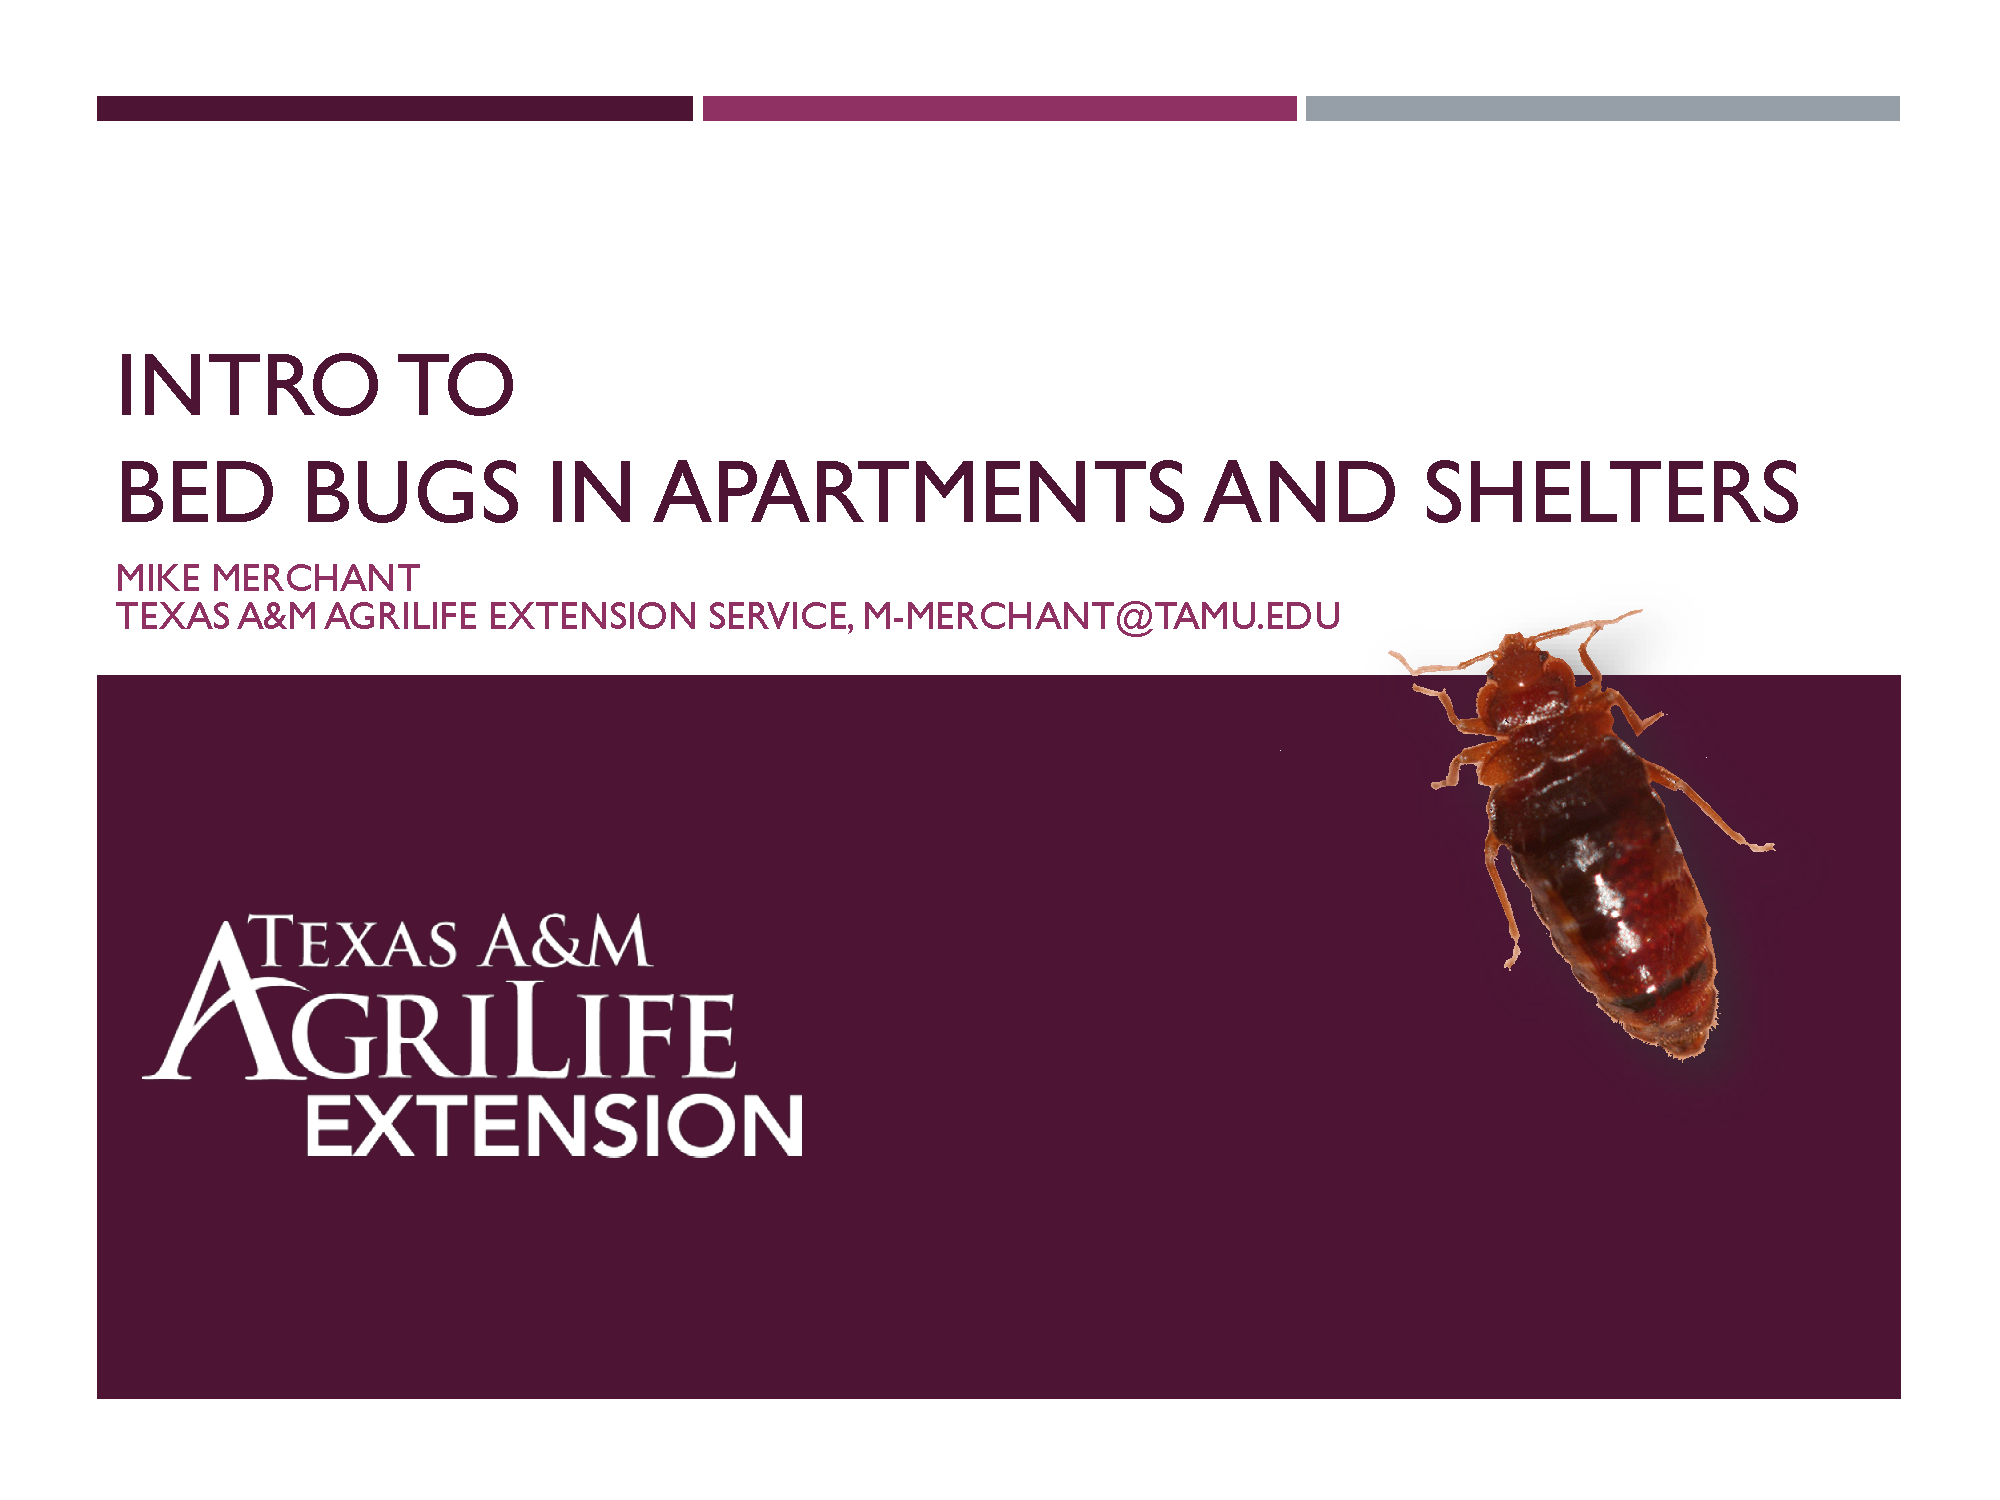 Texas A&M Agrilife Extension - Intro to Bed Bugs in Apartments and Shelters